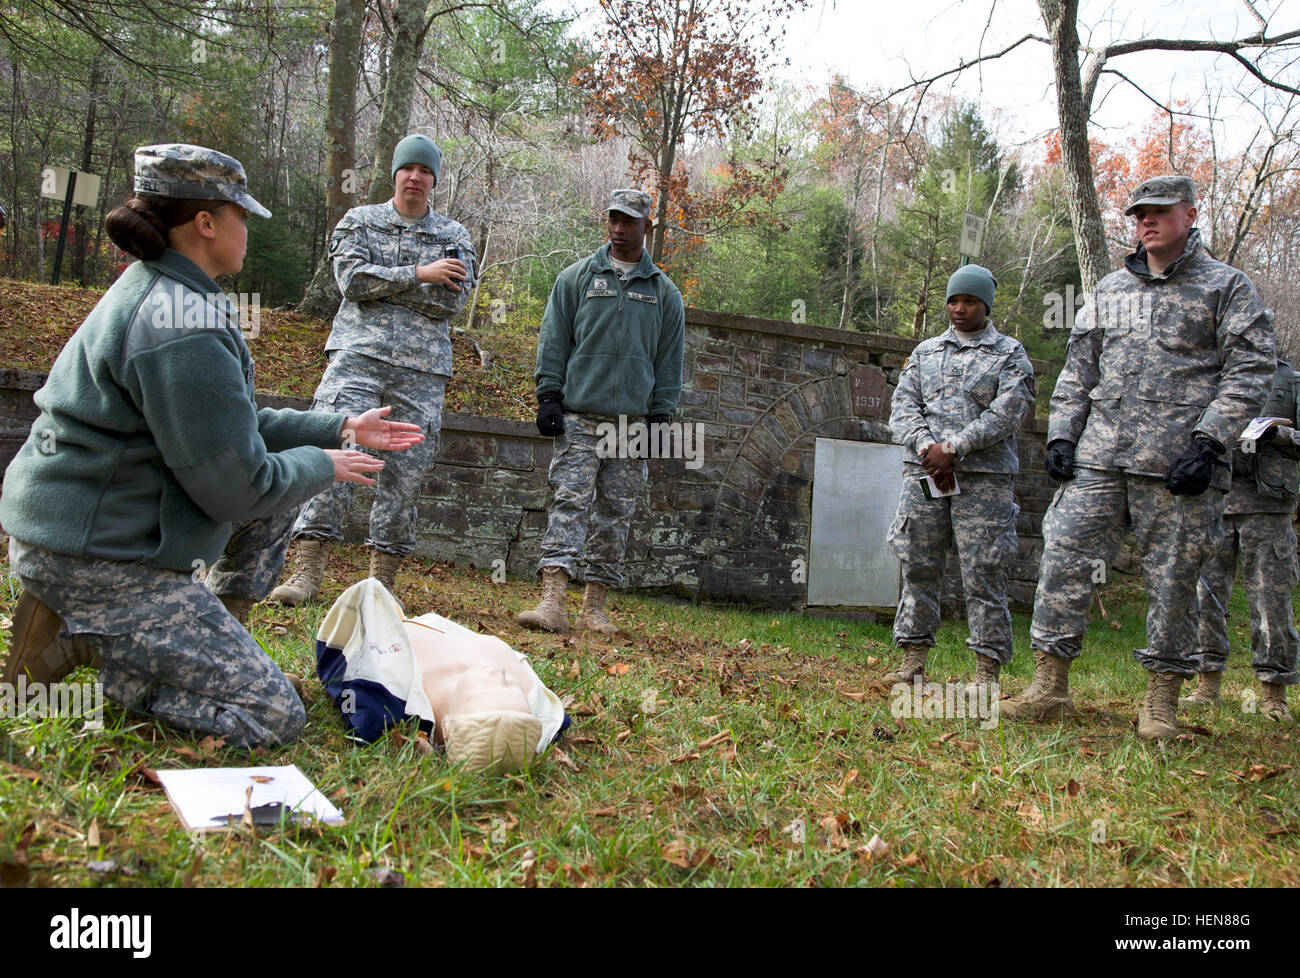 U.S. Army Staff Sgt. Valerie Mitchell, attached to 55th Signal Company (Combat Camera), teaches a class on life saving techniques during a tactical field training exercise (FTX) at the Ft. Indiantown Gap National Guard Training Center, Annville, Pa., Nov. 5, 2013. The FTX is conducted quarterly to bring soldiers together and practice tactical training from the Army Mission Essential Task List as a battalion. (U.S. Army photo by Sgt. Evangelia Grigiss/Released) 114th Signal Battalion field training exercise 131105-A-LQ527-085 Stock Photo